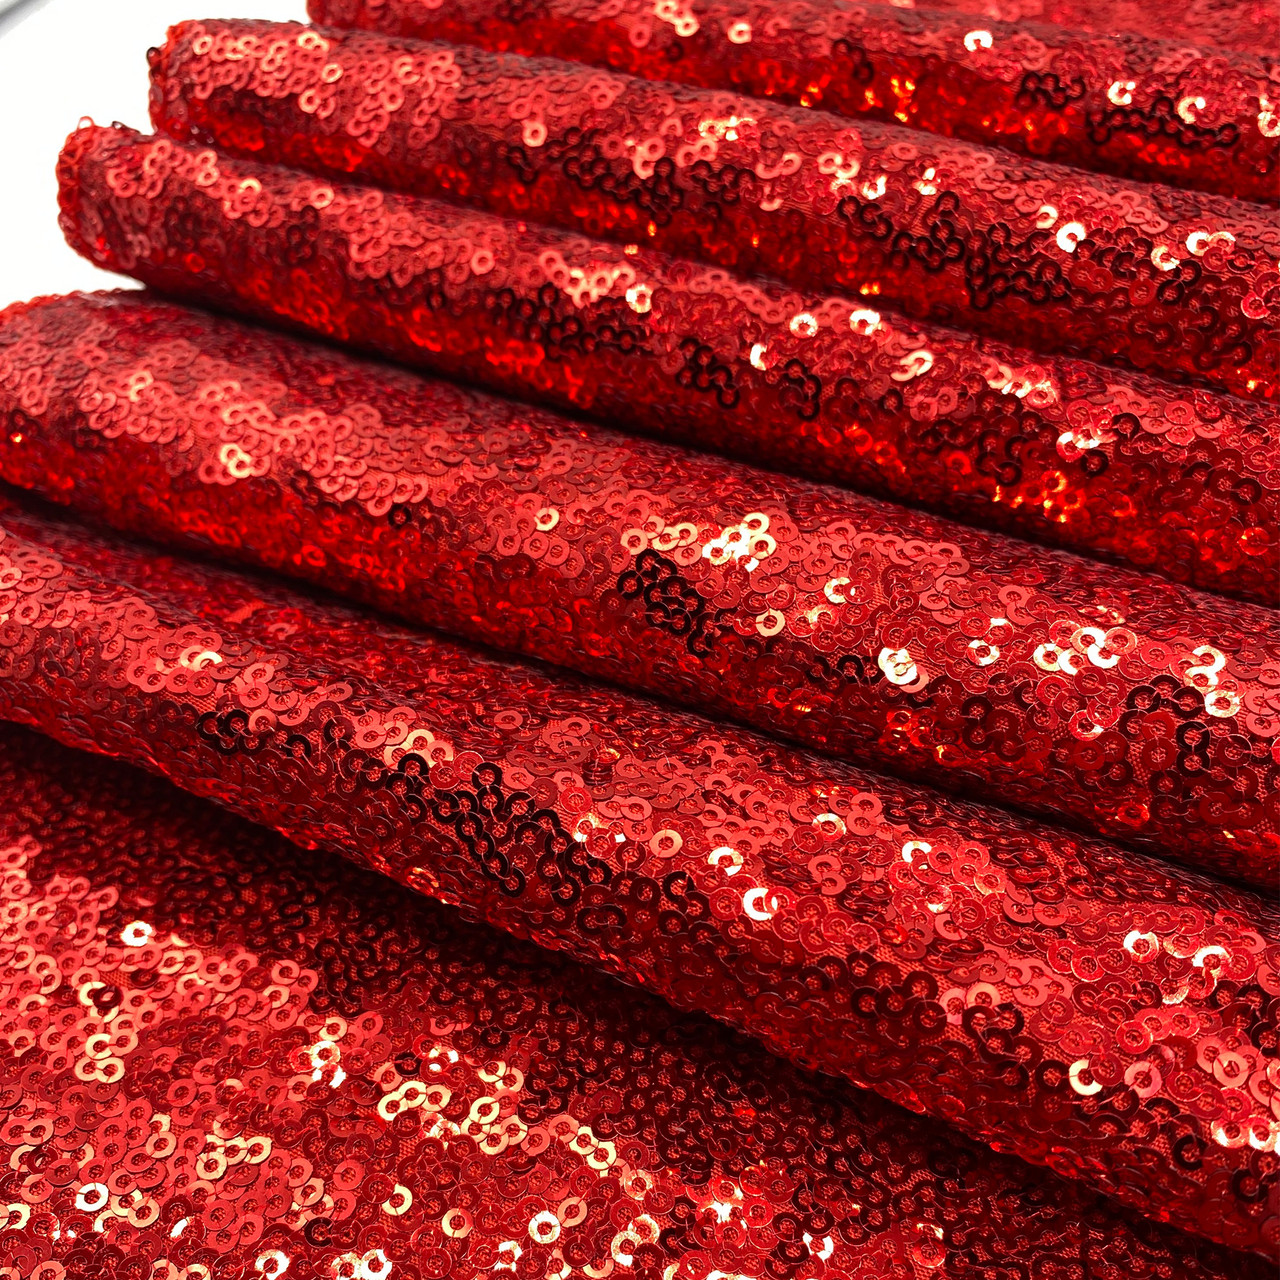  30g/Lot Red Sequin for Sewing Sequin Dresses for Women-Red  Sequins for Crafts Sewing-Loose Sequins for Crafts-DIY Champagne Sequins  Tablecloth Backdrop Curtain Table Runner Dress (10mm Flat)